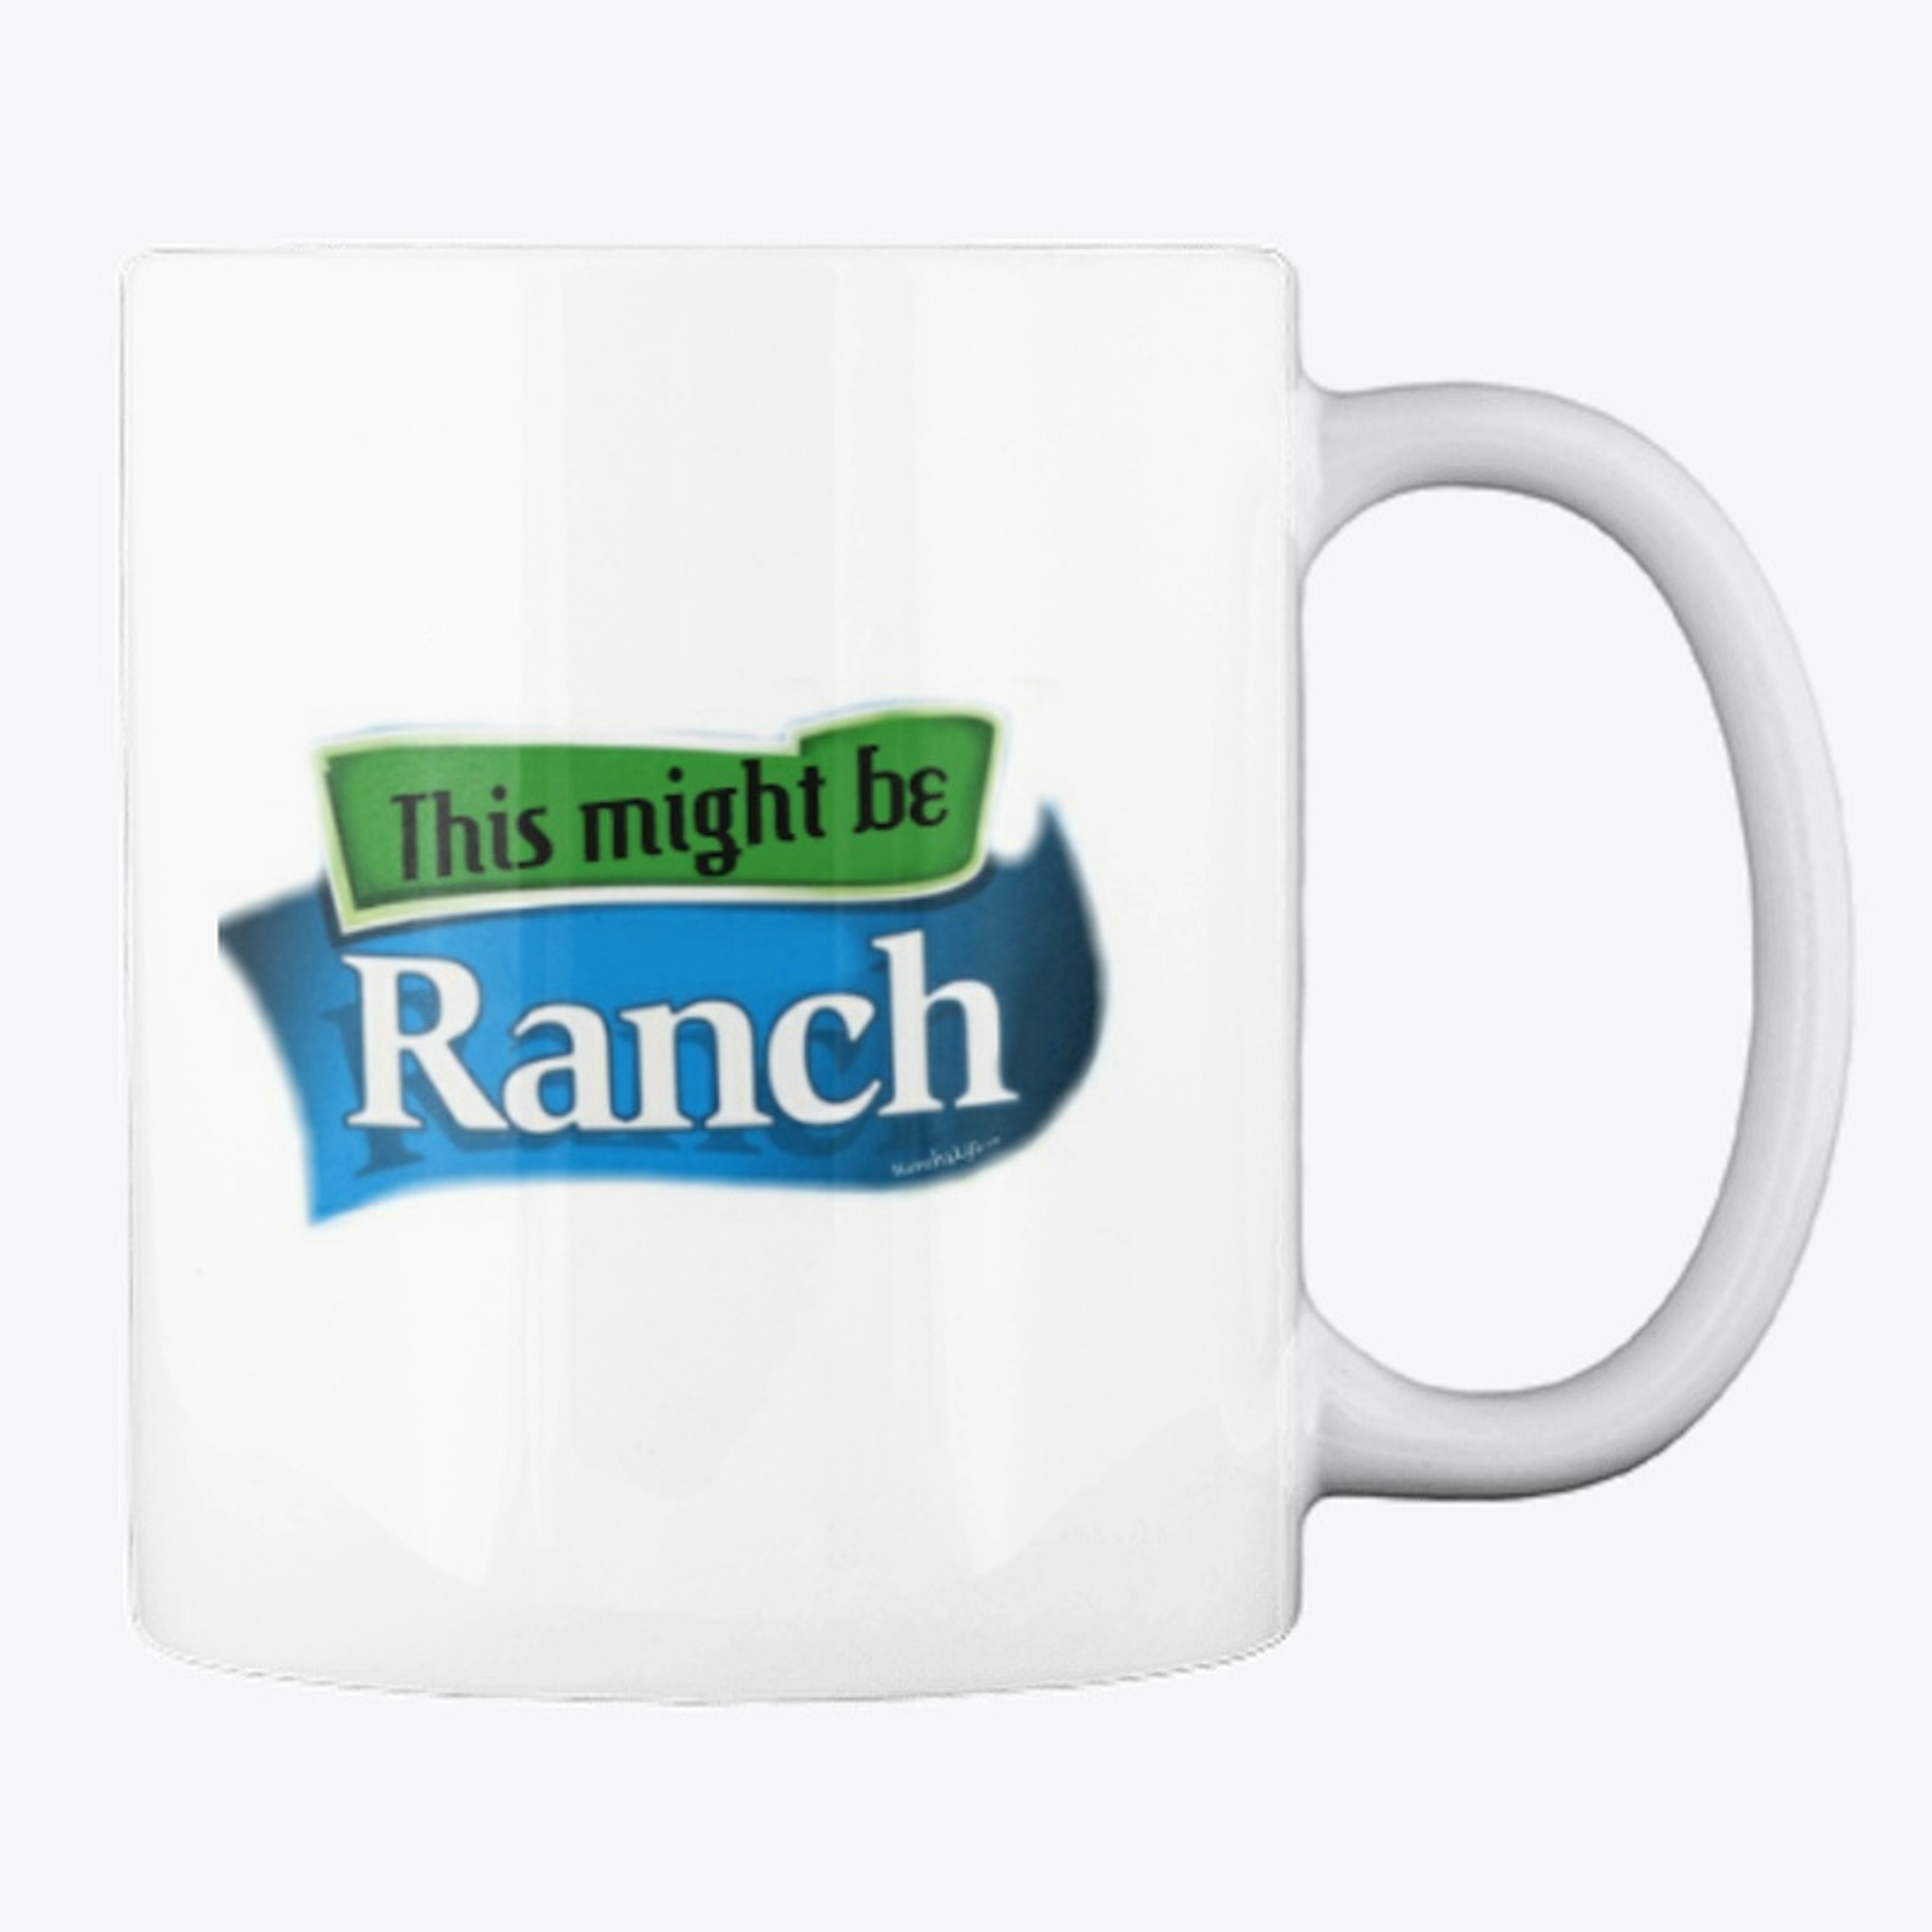 This might be Ranch cup